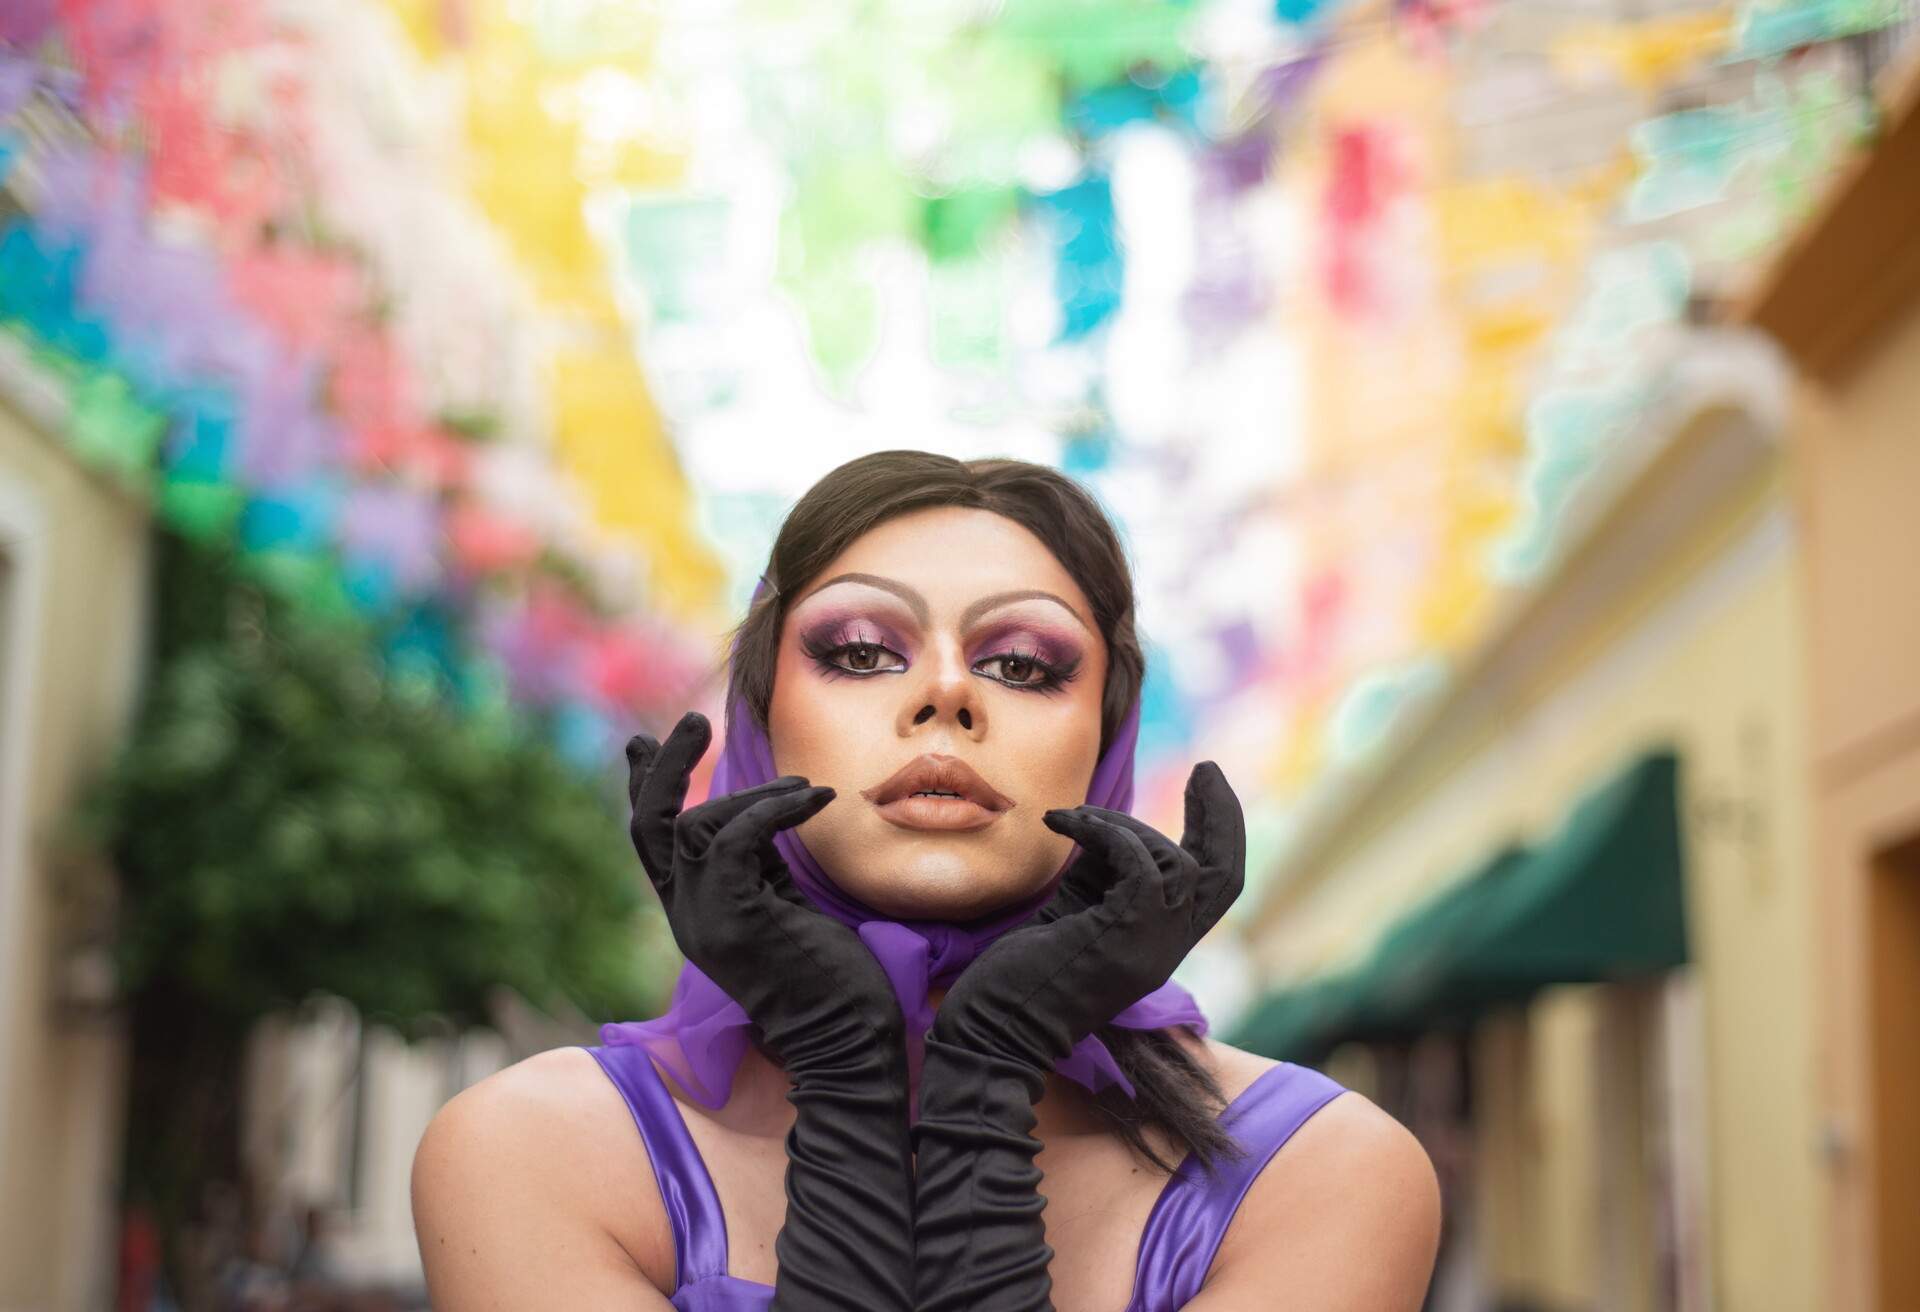 Drag Queen street portrait with multicolor background. Young man dressed as a woman looking at the camera. 